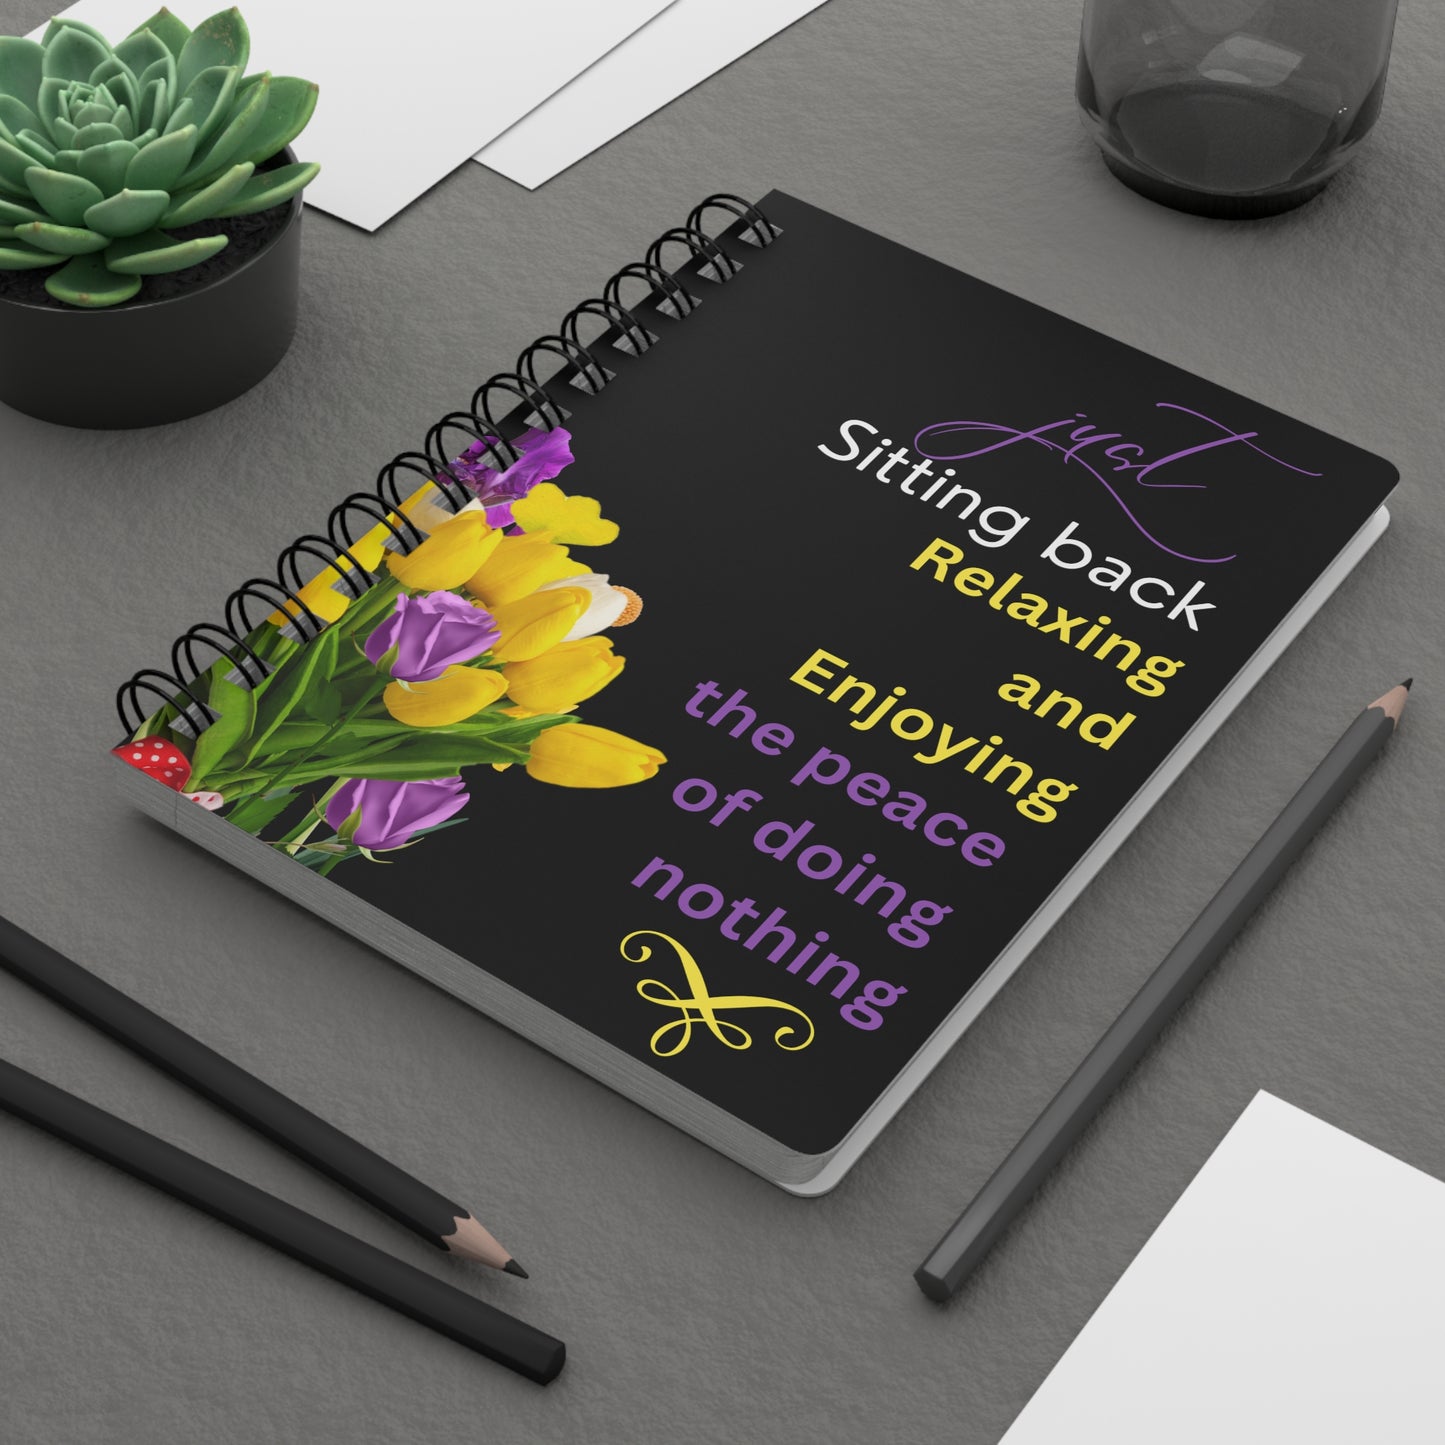 "Just Sitting Back Relaxing" Inspirational - Spiral Bound Journal